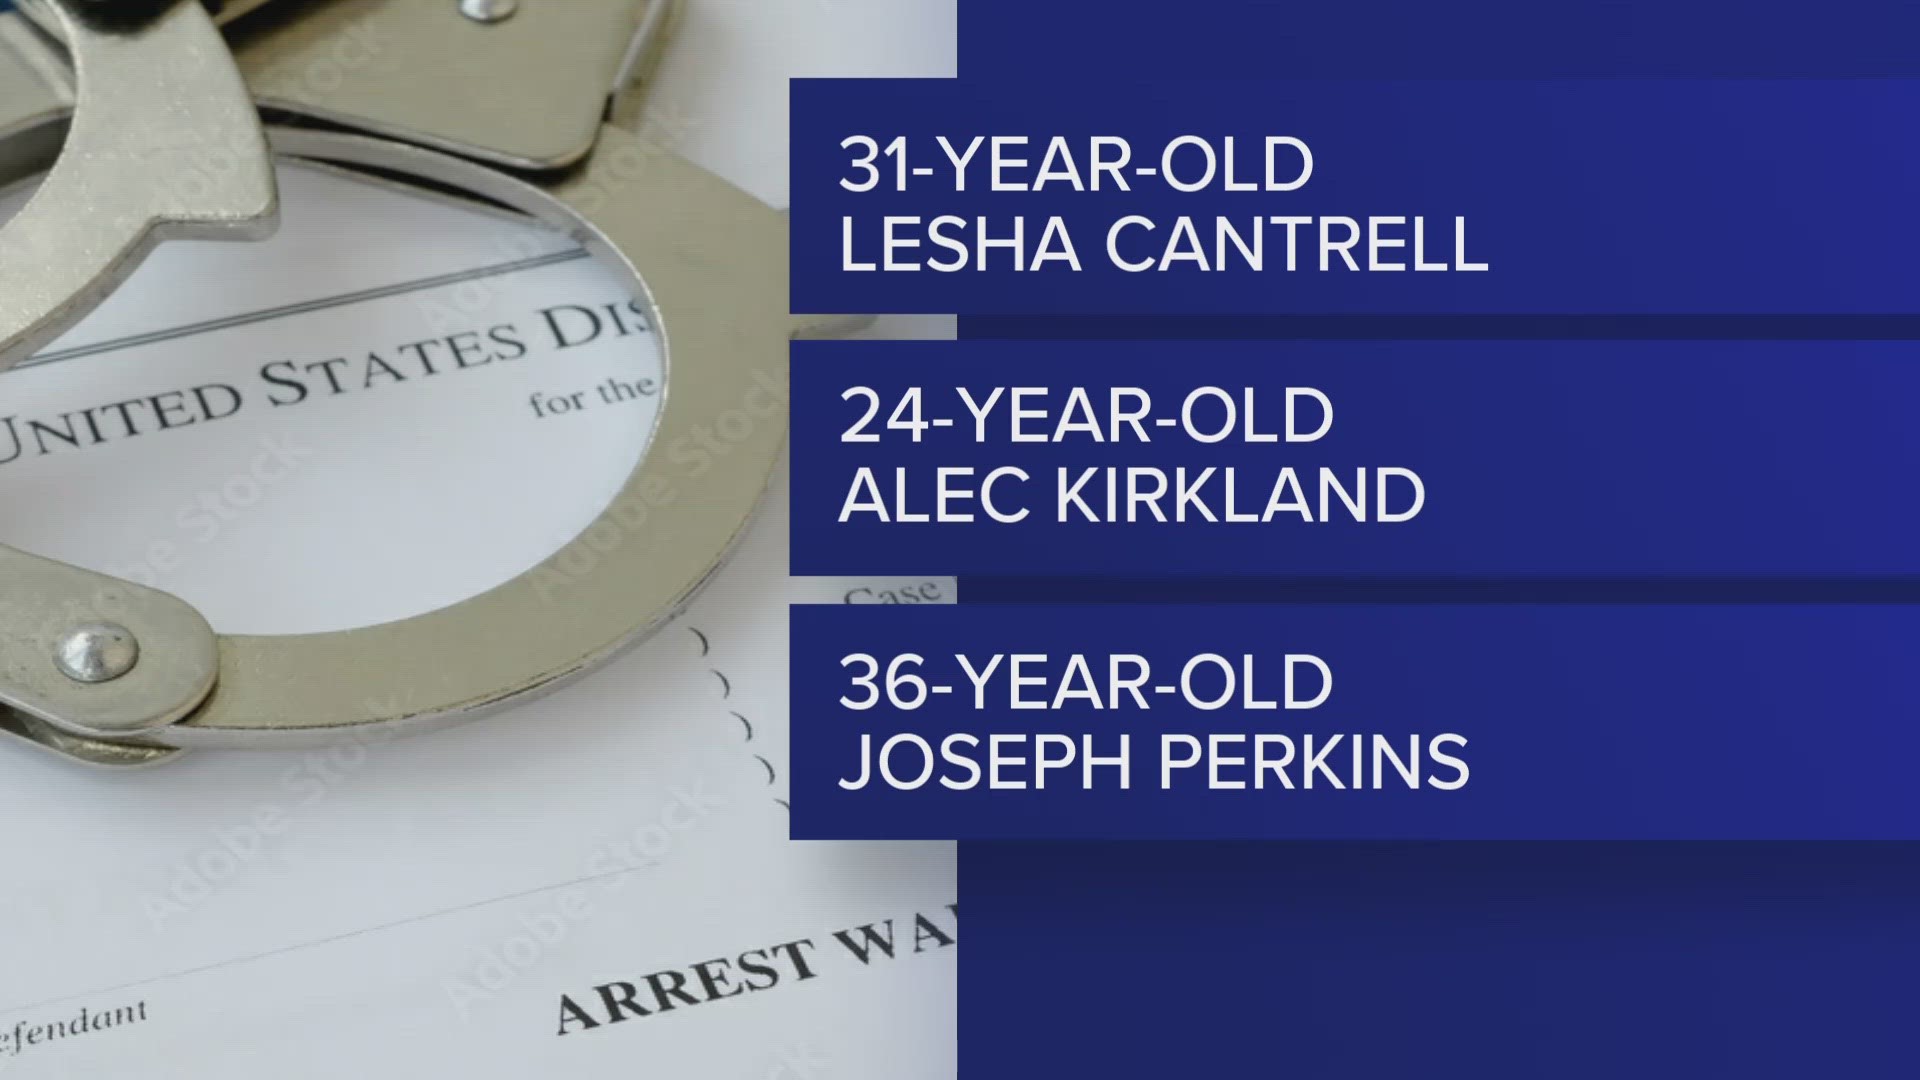 Warrants have been issued for 31-year-old Lesha Cantrell, 24-year-old Alex Kirkland and 36-year-old Joseph Perkins.